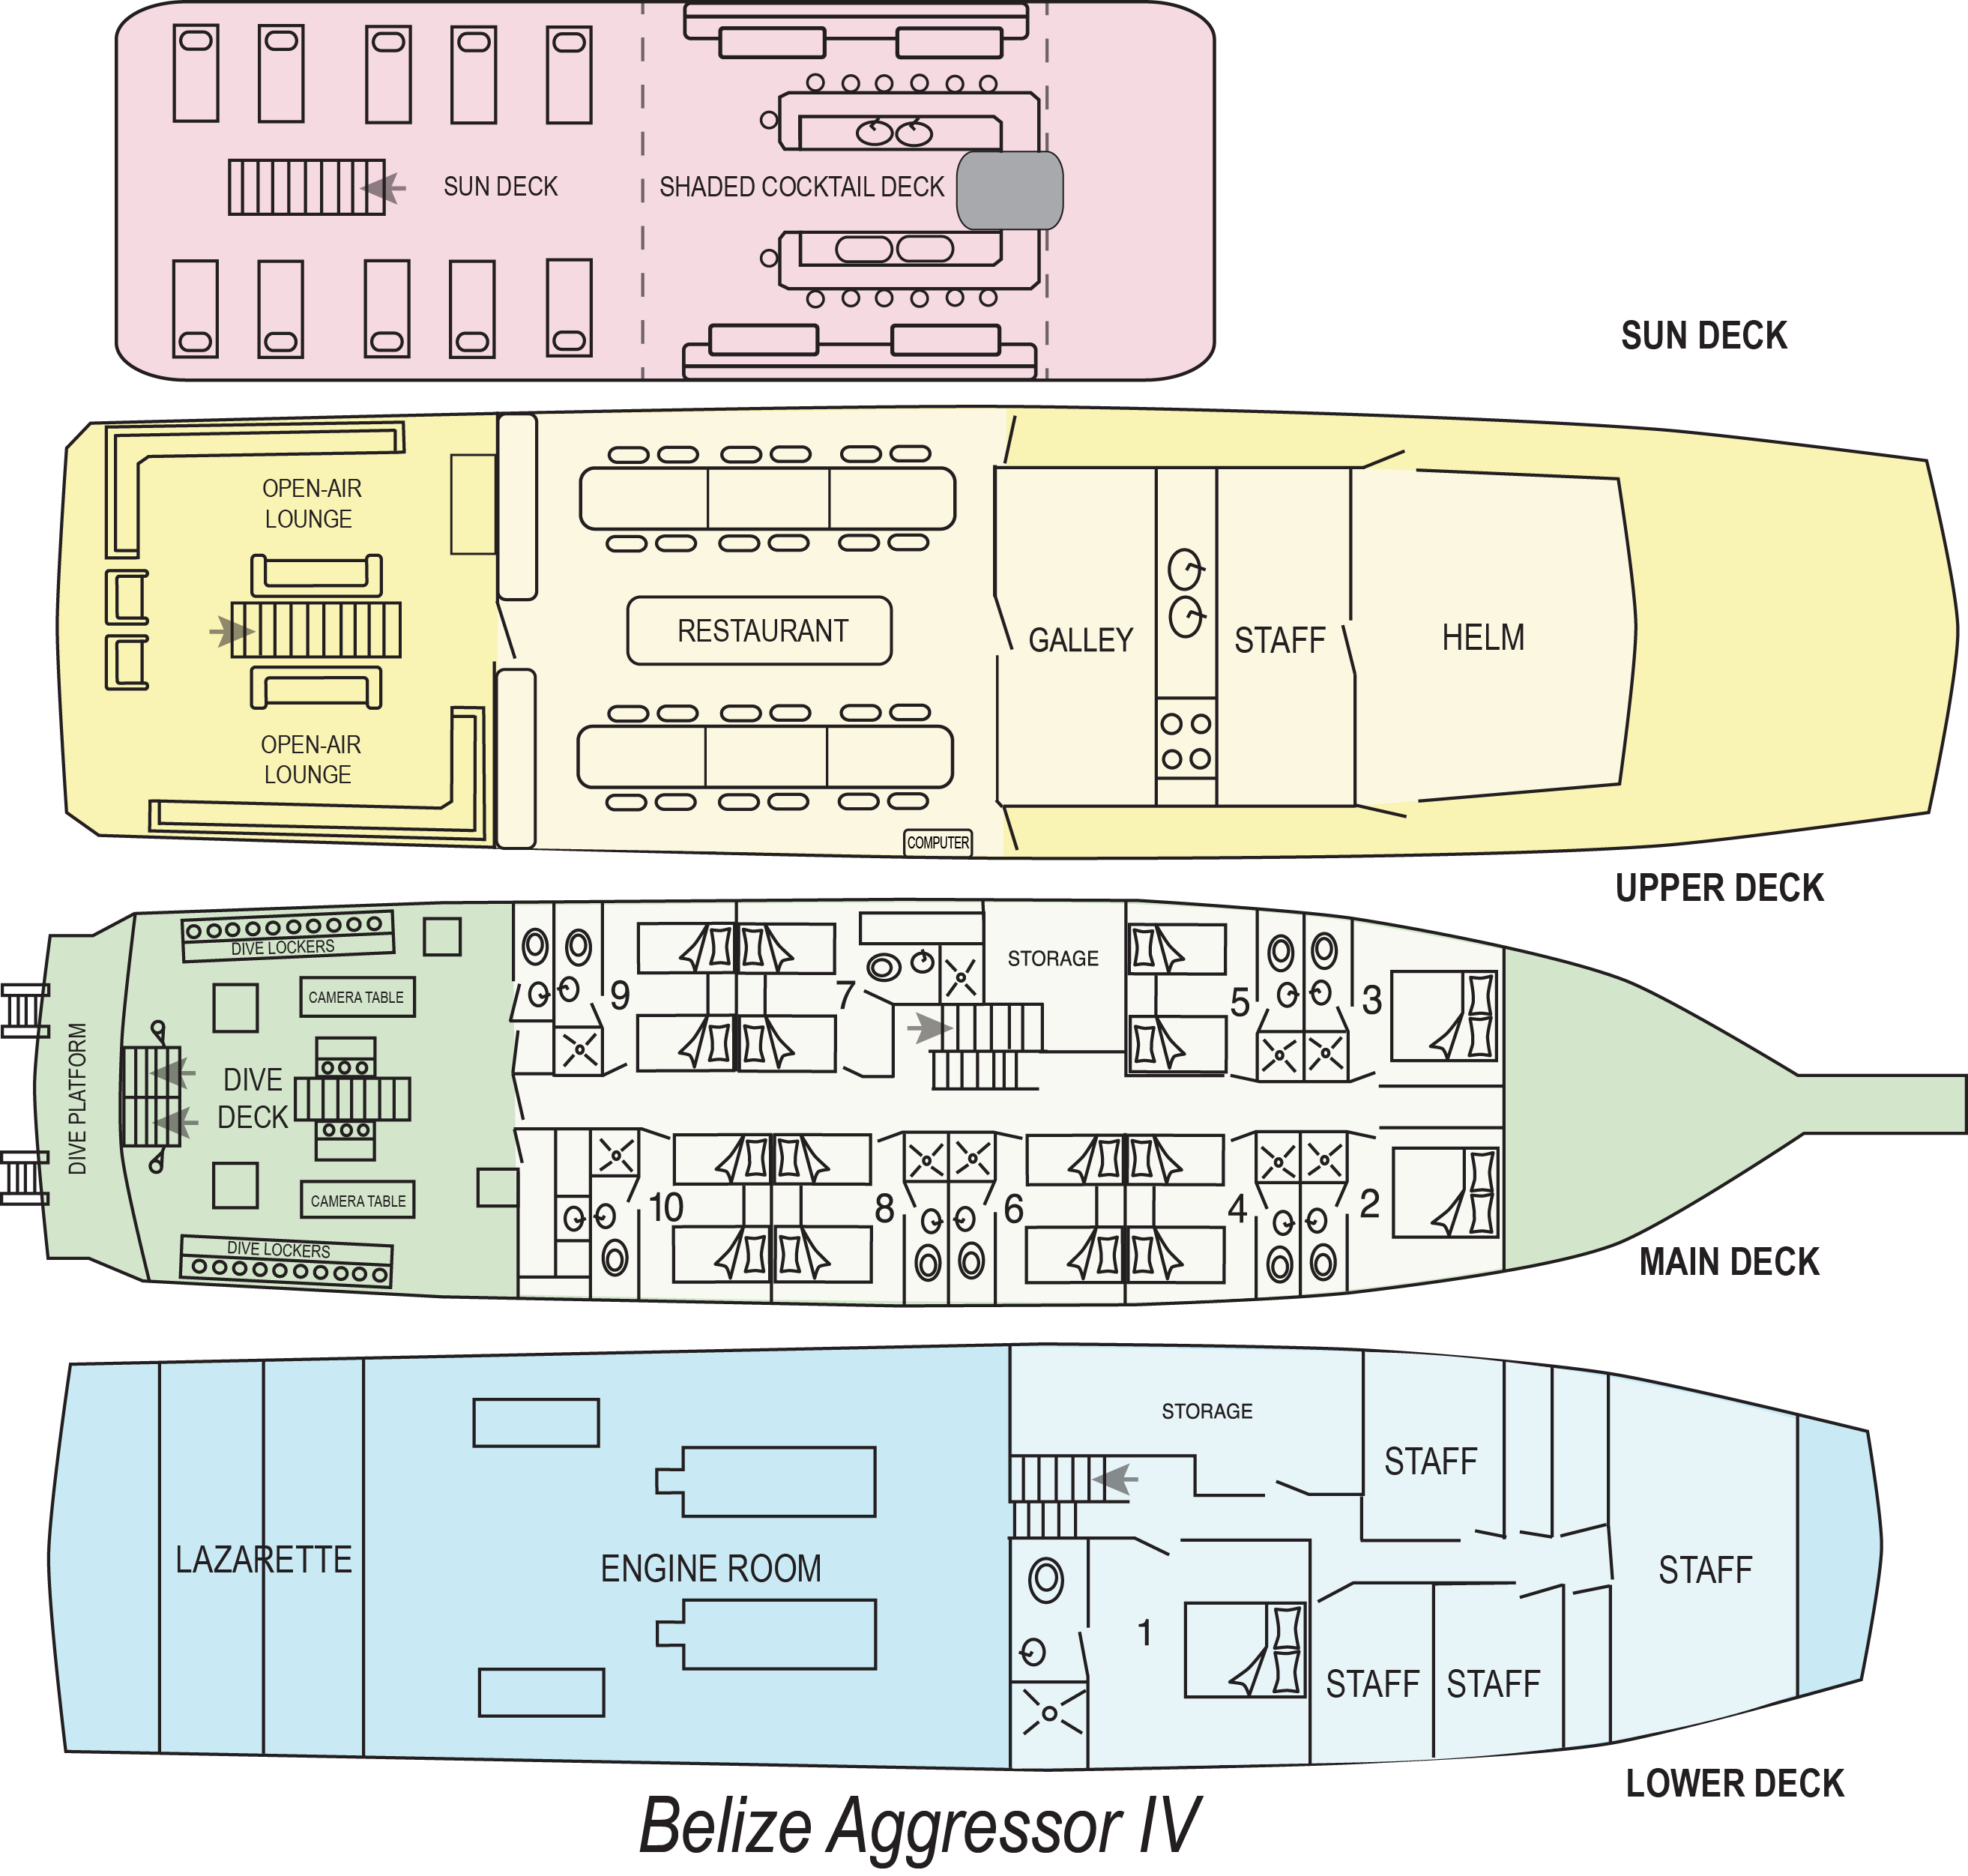 Diagram of the Belize Aggressor IV. The "Lower Deck" is on the bottom and lists the Lazarette, Enginge Room, storage, 1 guest room, and staff areas. The Main Deck is above that with the Dive Platform, Dive Deck, Storage, and 9 guest rooms. The next level is the Upper Deck with an Open-air Lounge, Restaurant, Galley, Staff area, and Helm. The final deck, at the top, is the Sun Deck, with a Sun Deck and Shaden Cocktail Deck. 